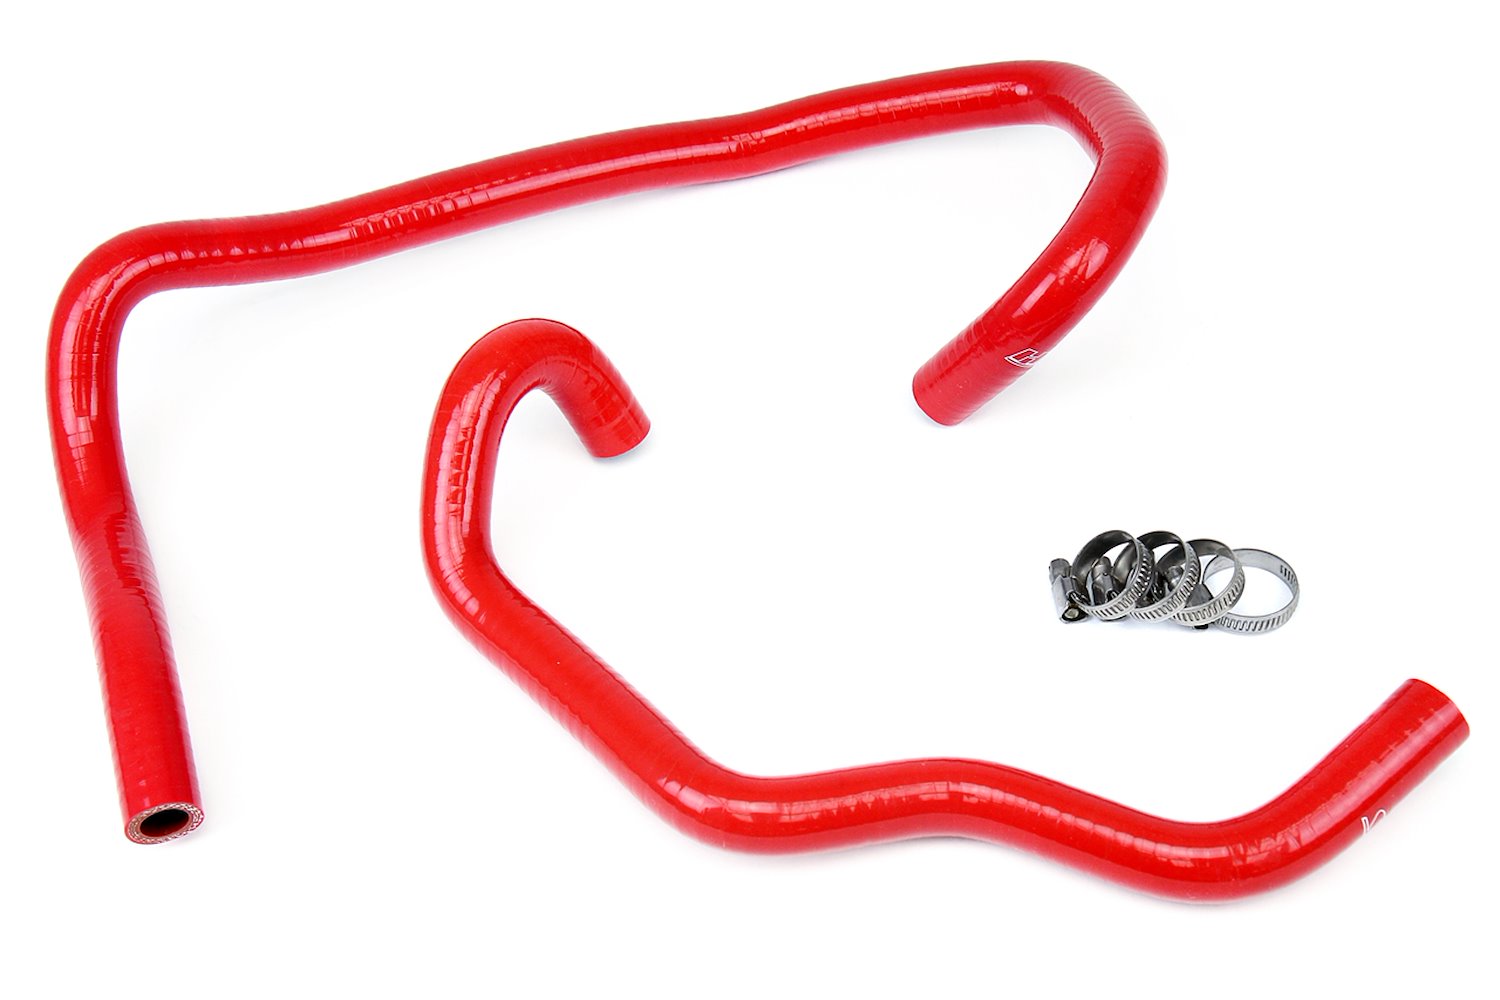 57-1469-RED Heater Hose Kit, High-Temp 3-Ply Reinforced Silicone, Replace OEM Rubber Heater Coolant Hoses